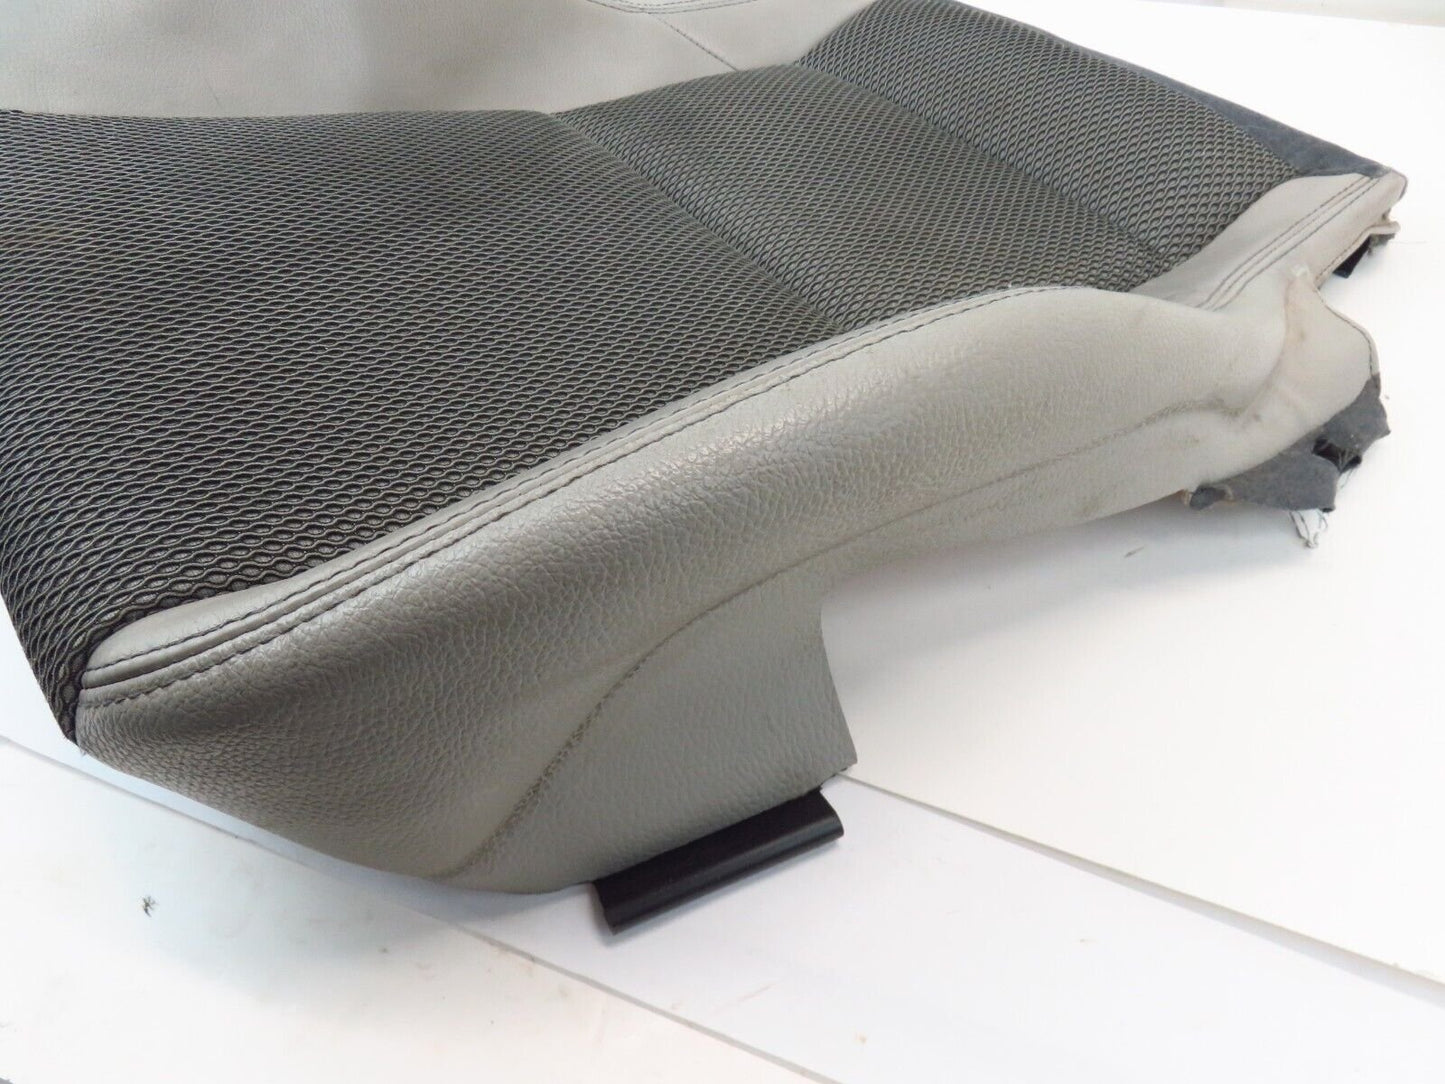 2014 Hyundai Genesis Coupe Driver Front Seat Cover Skin LH Lower Bottom 13-16